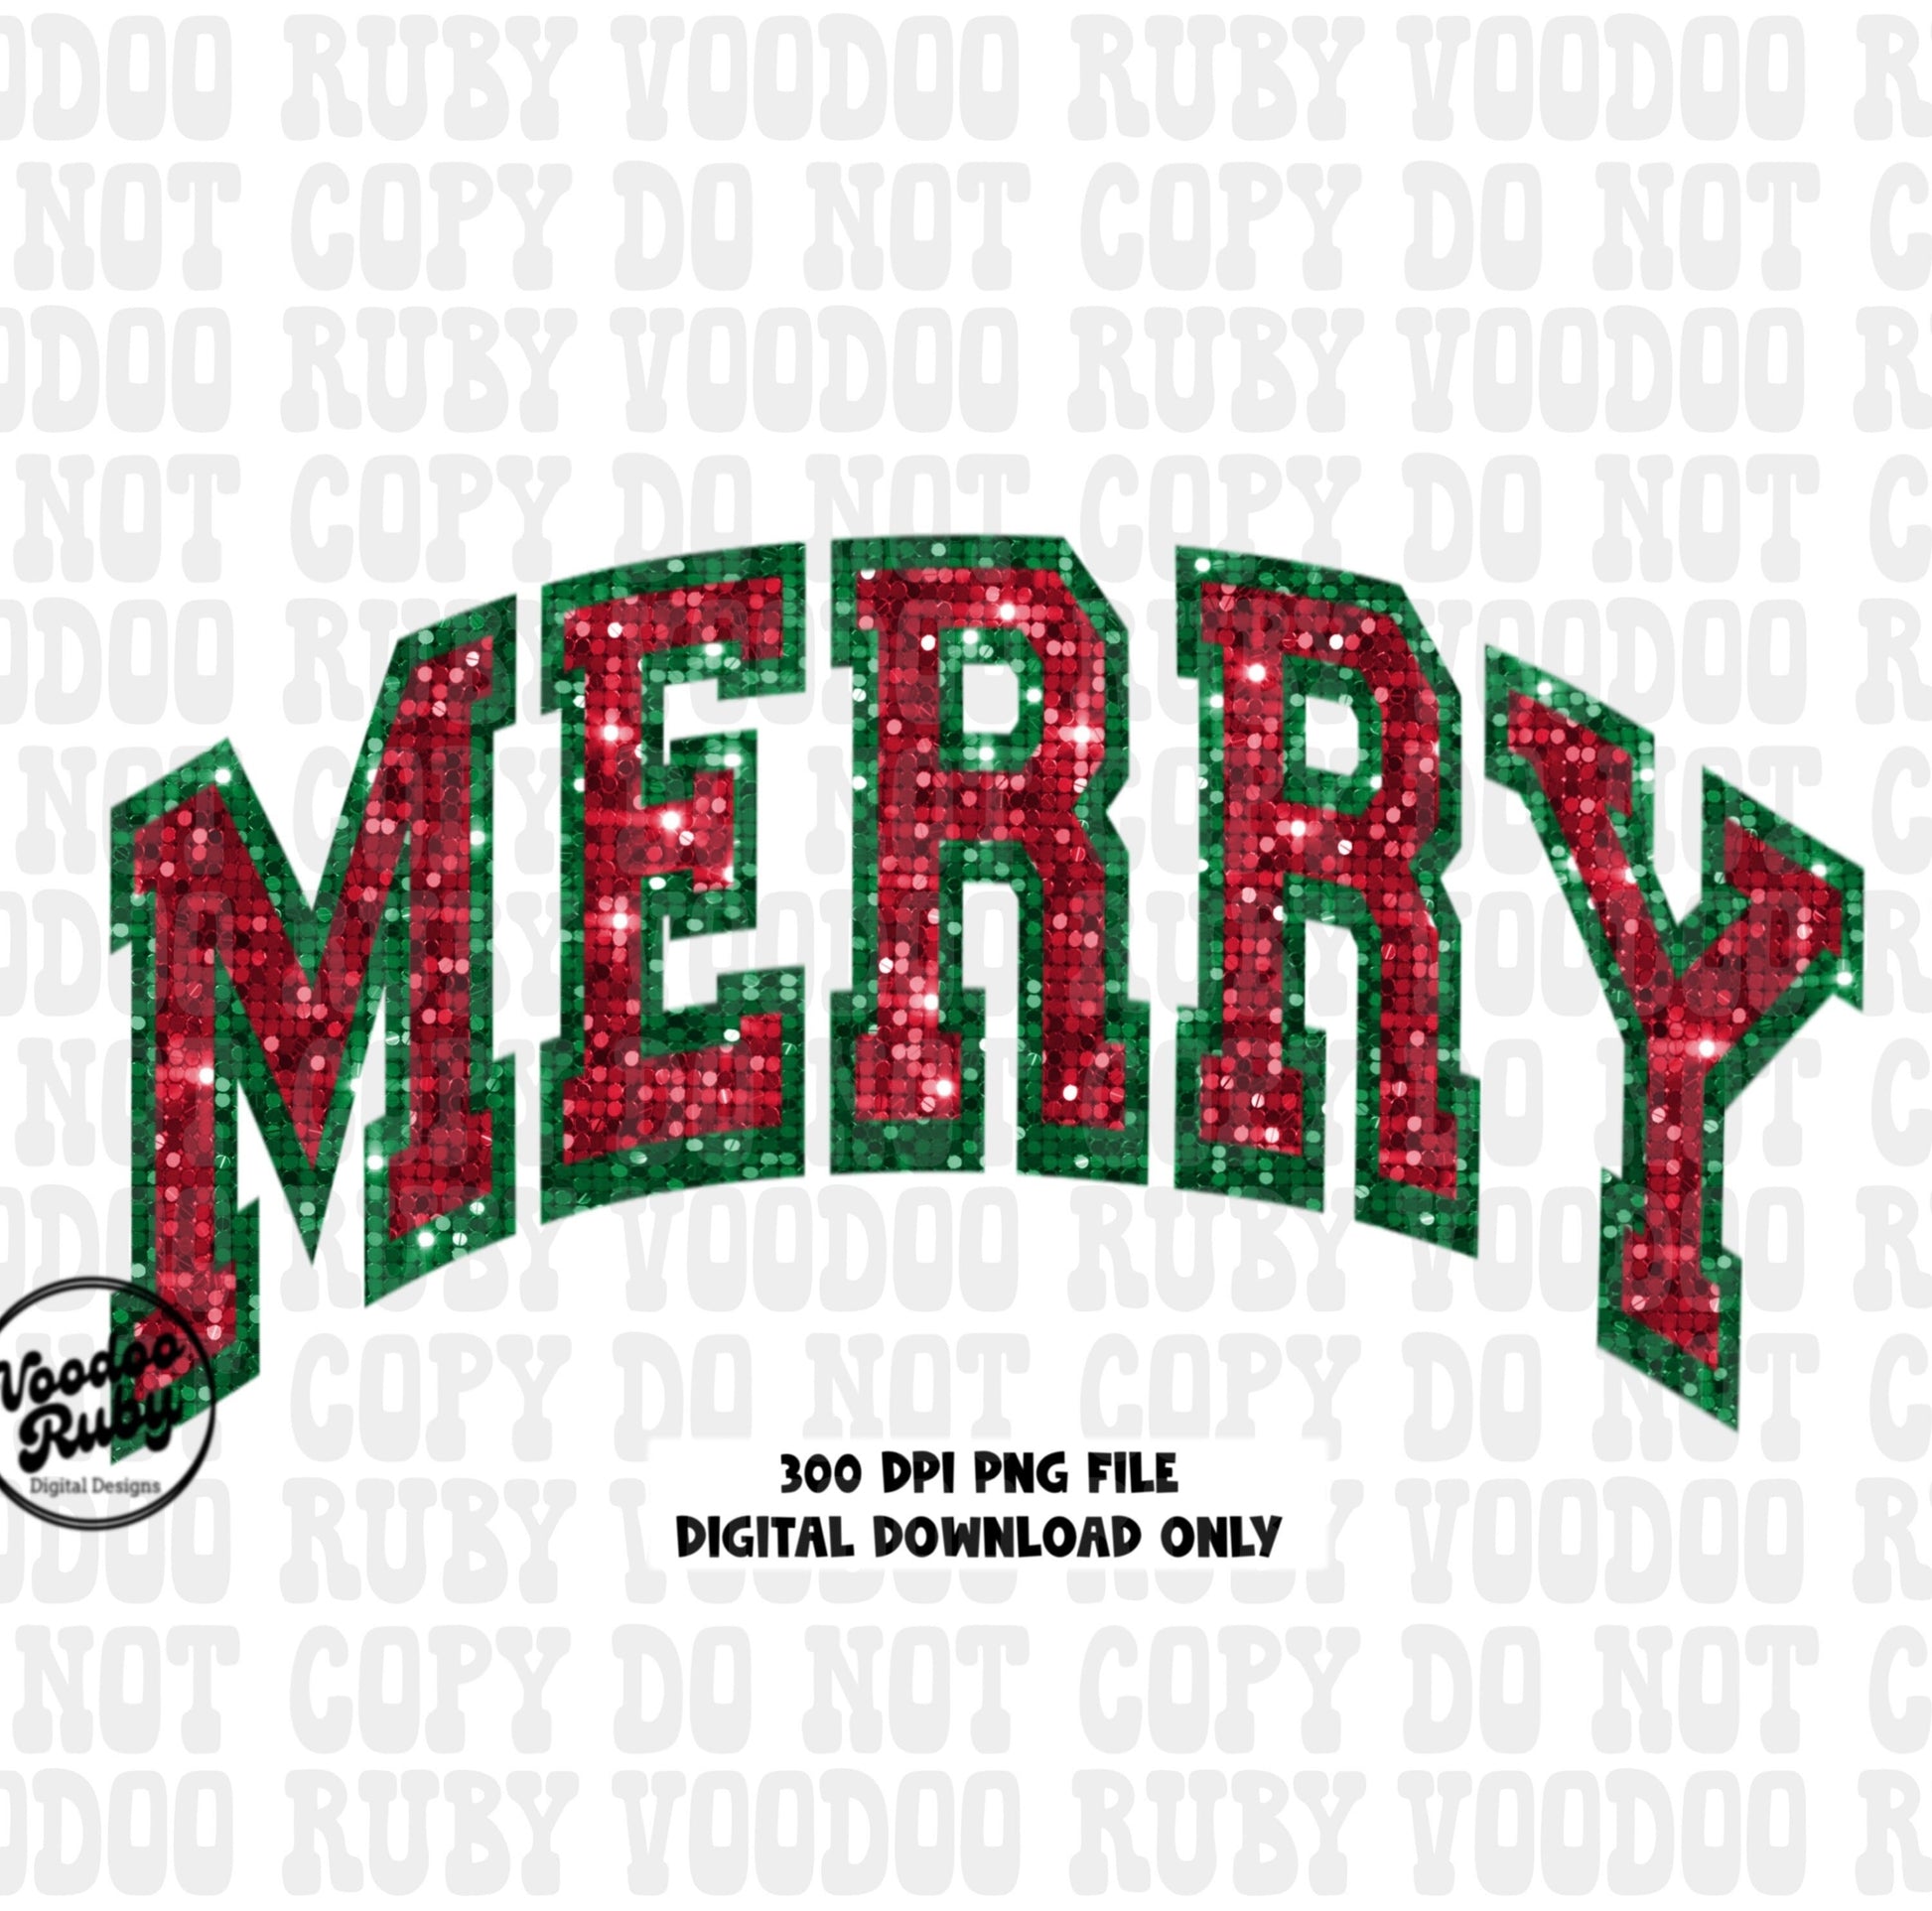 Sequin Merry png design red and green faux sequin applique design in 300 dpi merry Christmas dtf printable design